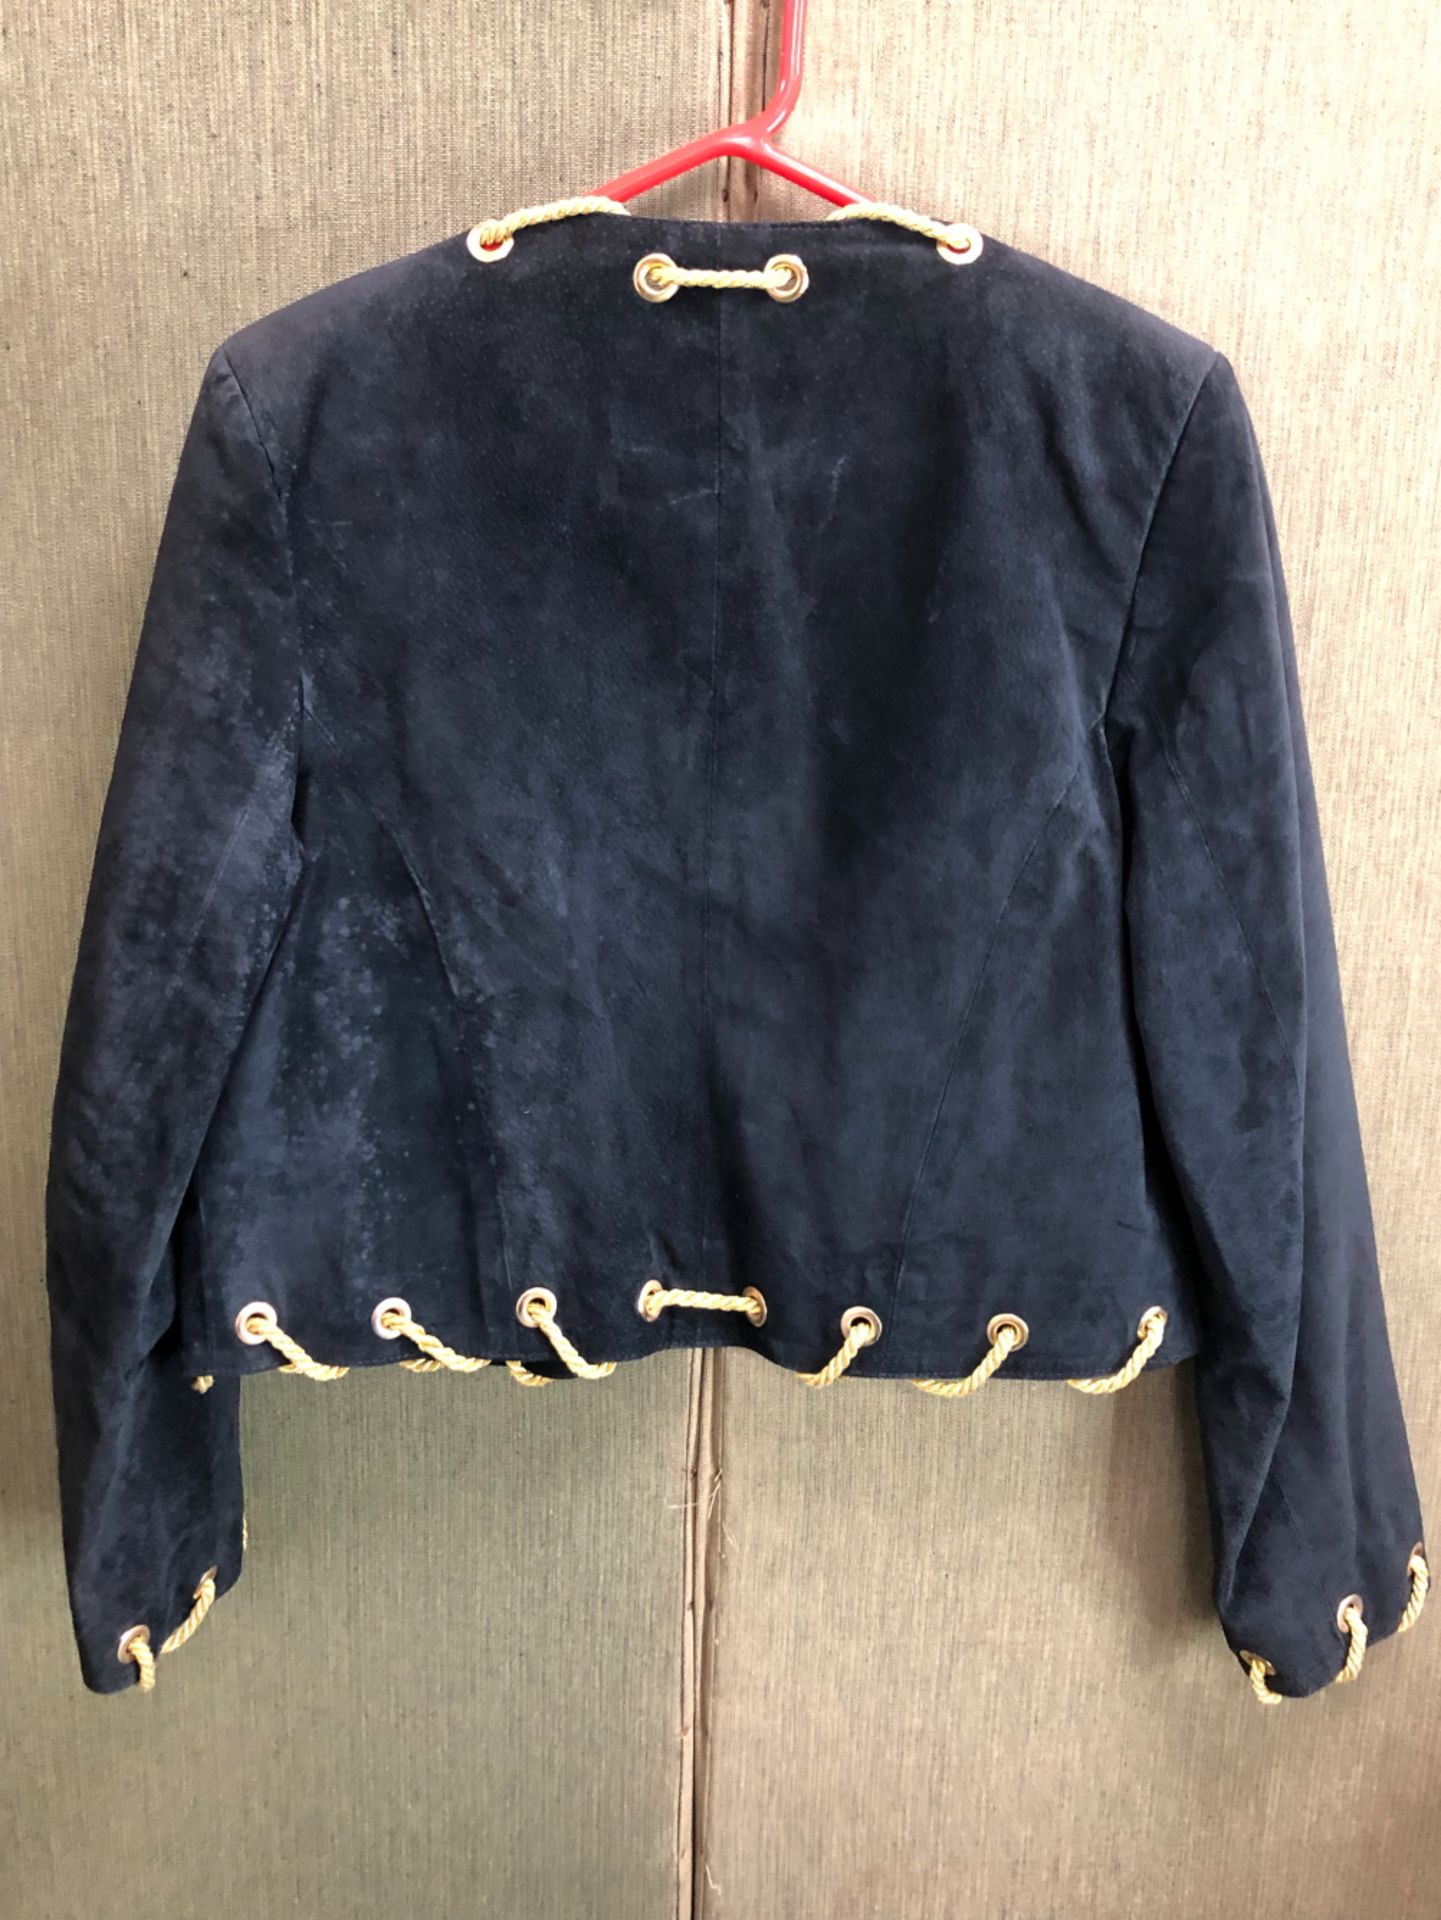 A DARK BLUE PLACE ROYALE SUEDE SHORT JACKET WITH GOLD STAR ROPE DETAIL GB 10/12 - Image 4 of 4